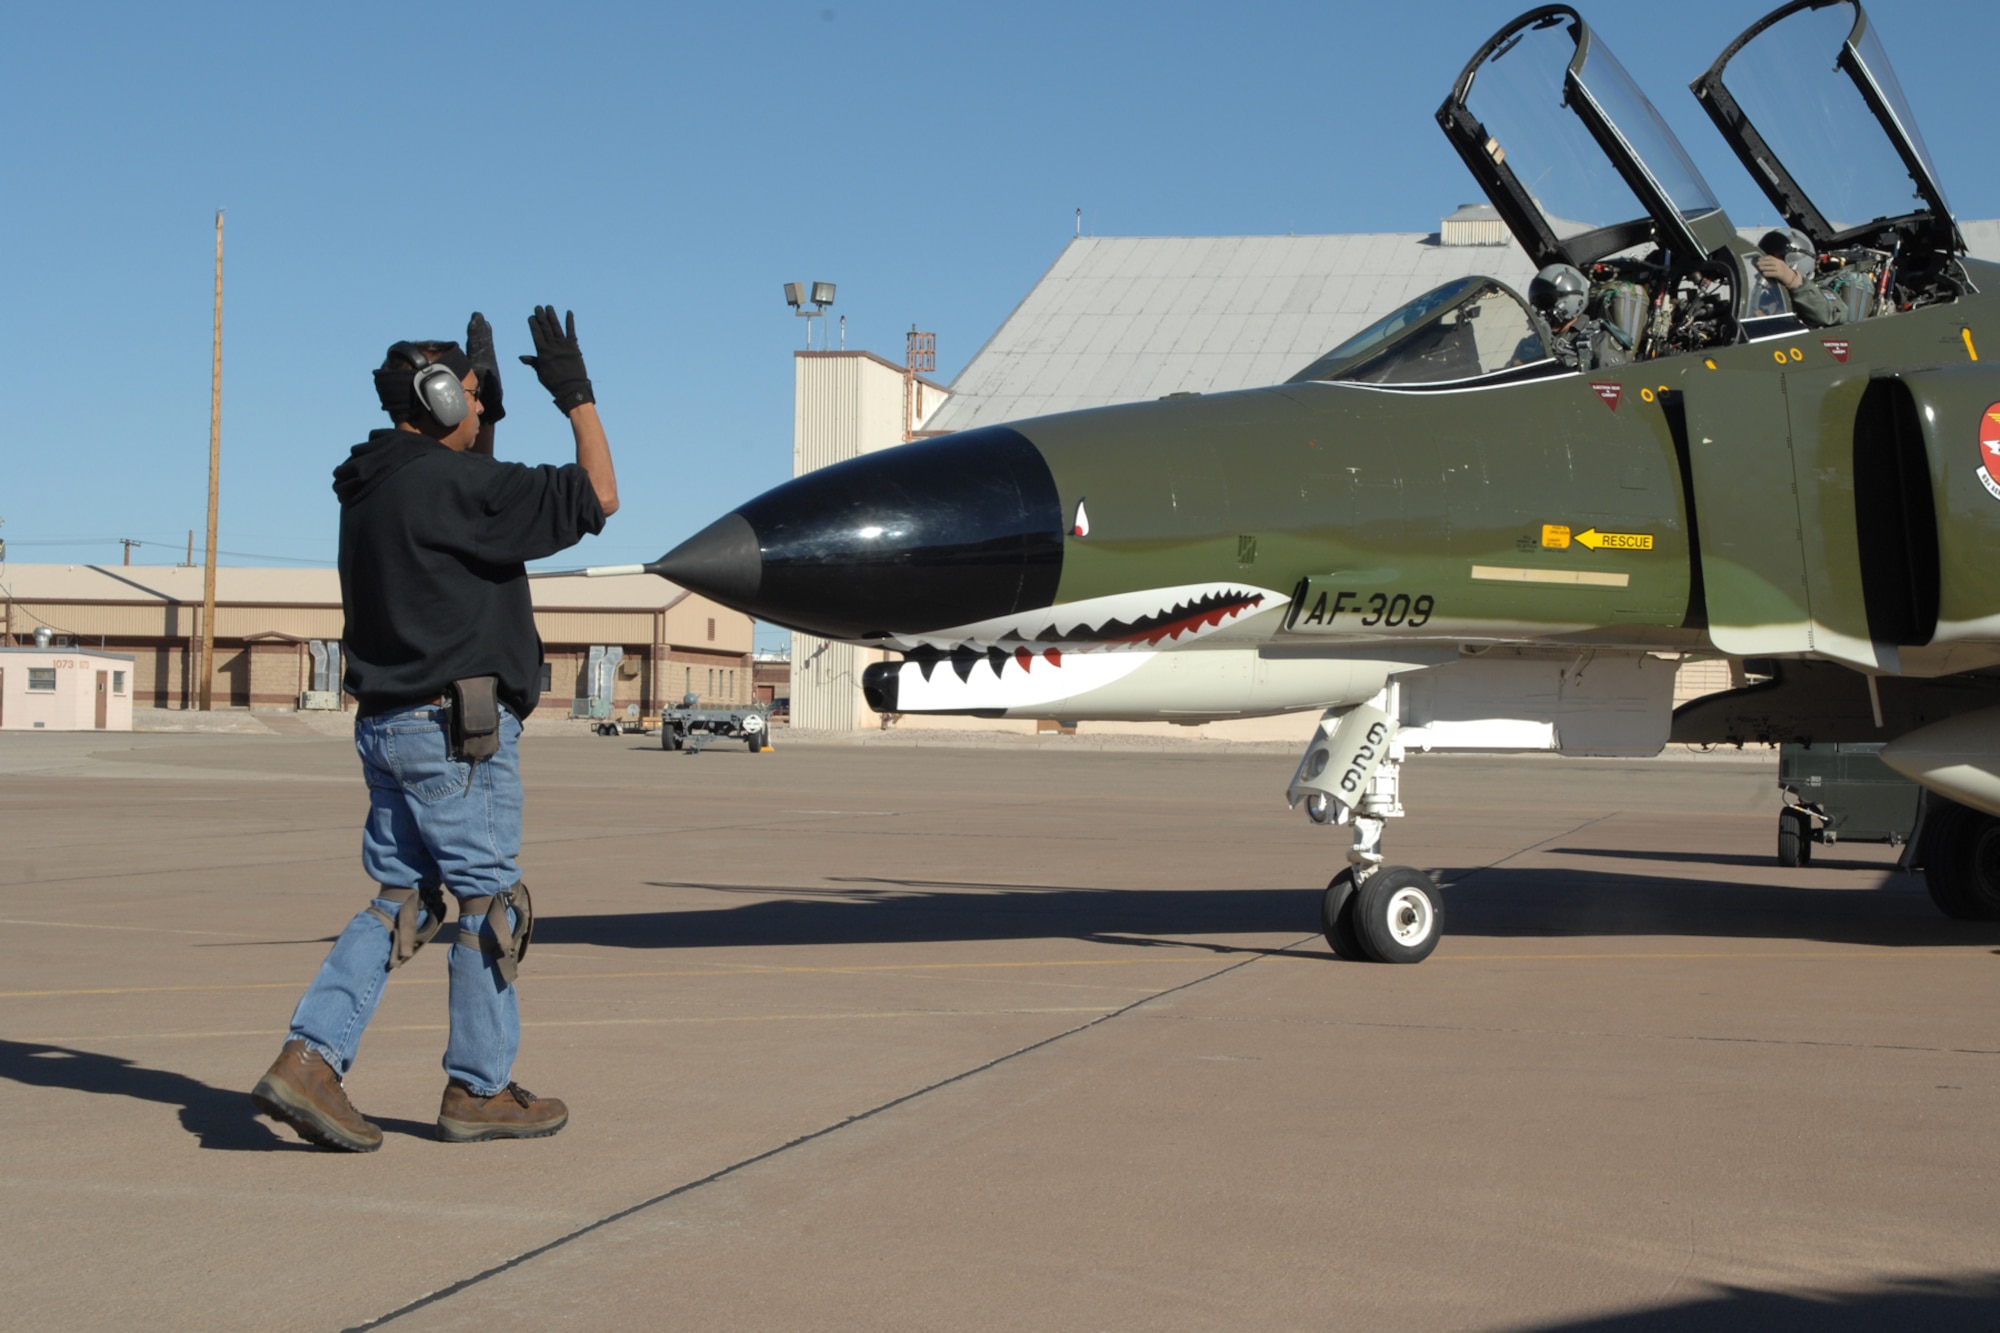 Bobby Aguilera, Lockheed Martin Services Incorporated, marshalls the aircraft before flight in a F-4 Phantom by Brig. Gen. David Goldfein, 49th Fighter Wing commander, Dec. 20, 2007, at Holloman Air Force Base, N.M. This was General Goldfein's first flight in the Phantom. (U.S. Air Force photo/Airman 1st Class Jamal D. Sutter)